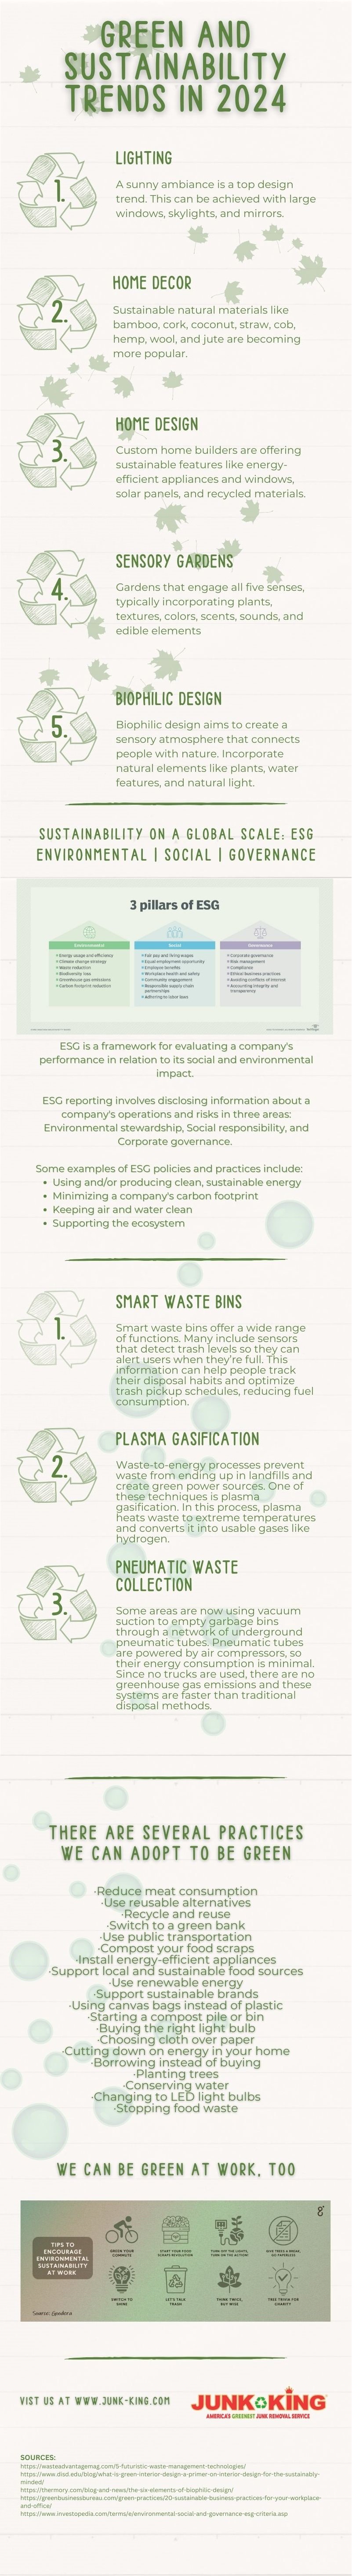 green-and-sustainability-trends-in-2024